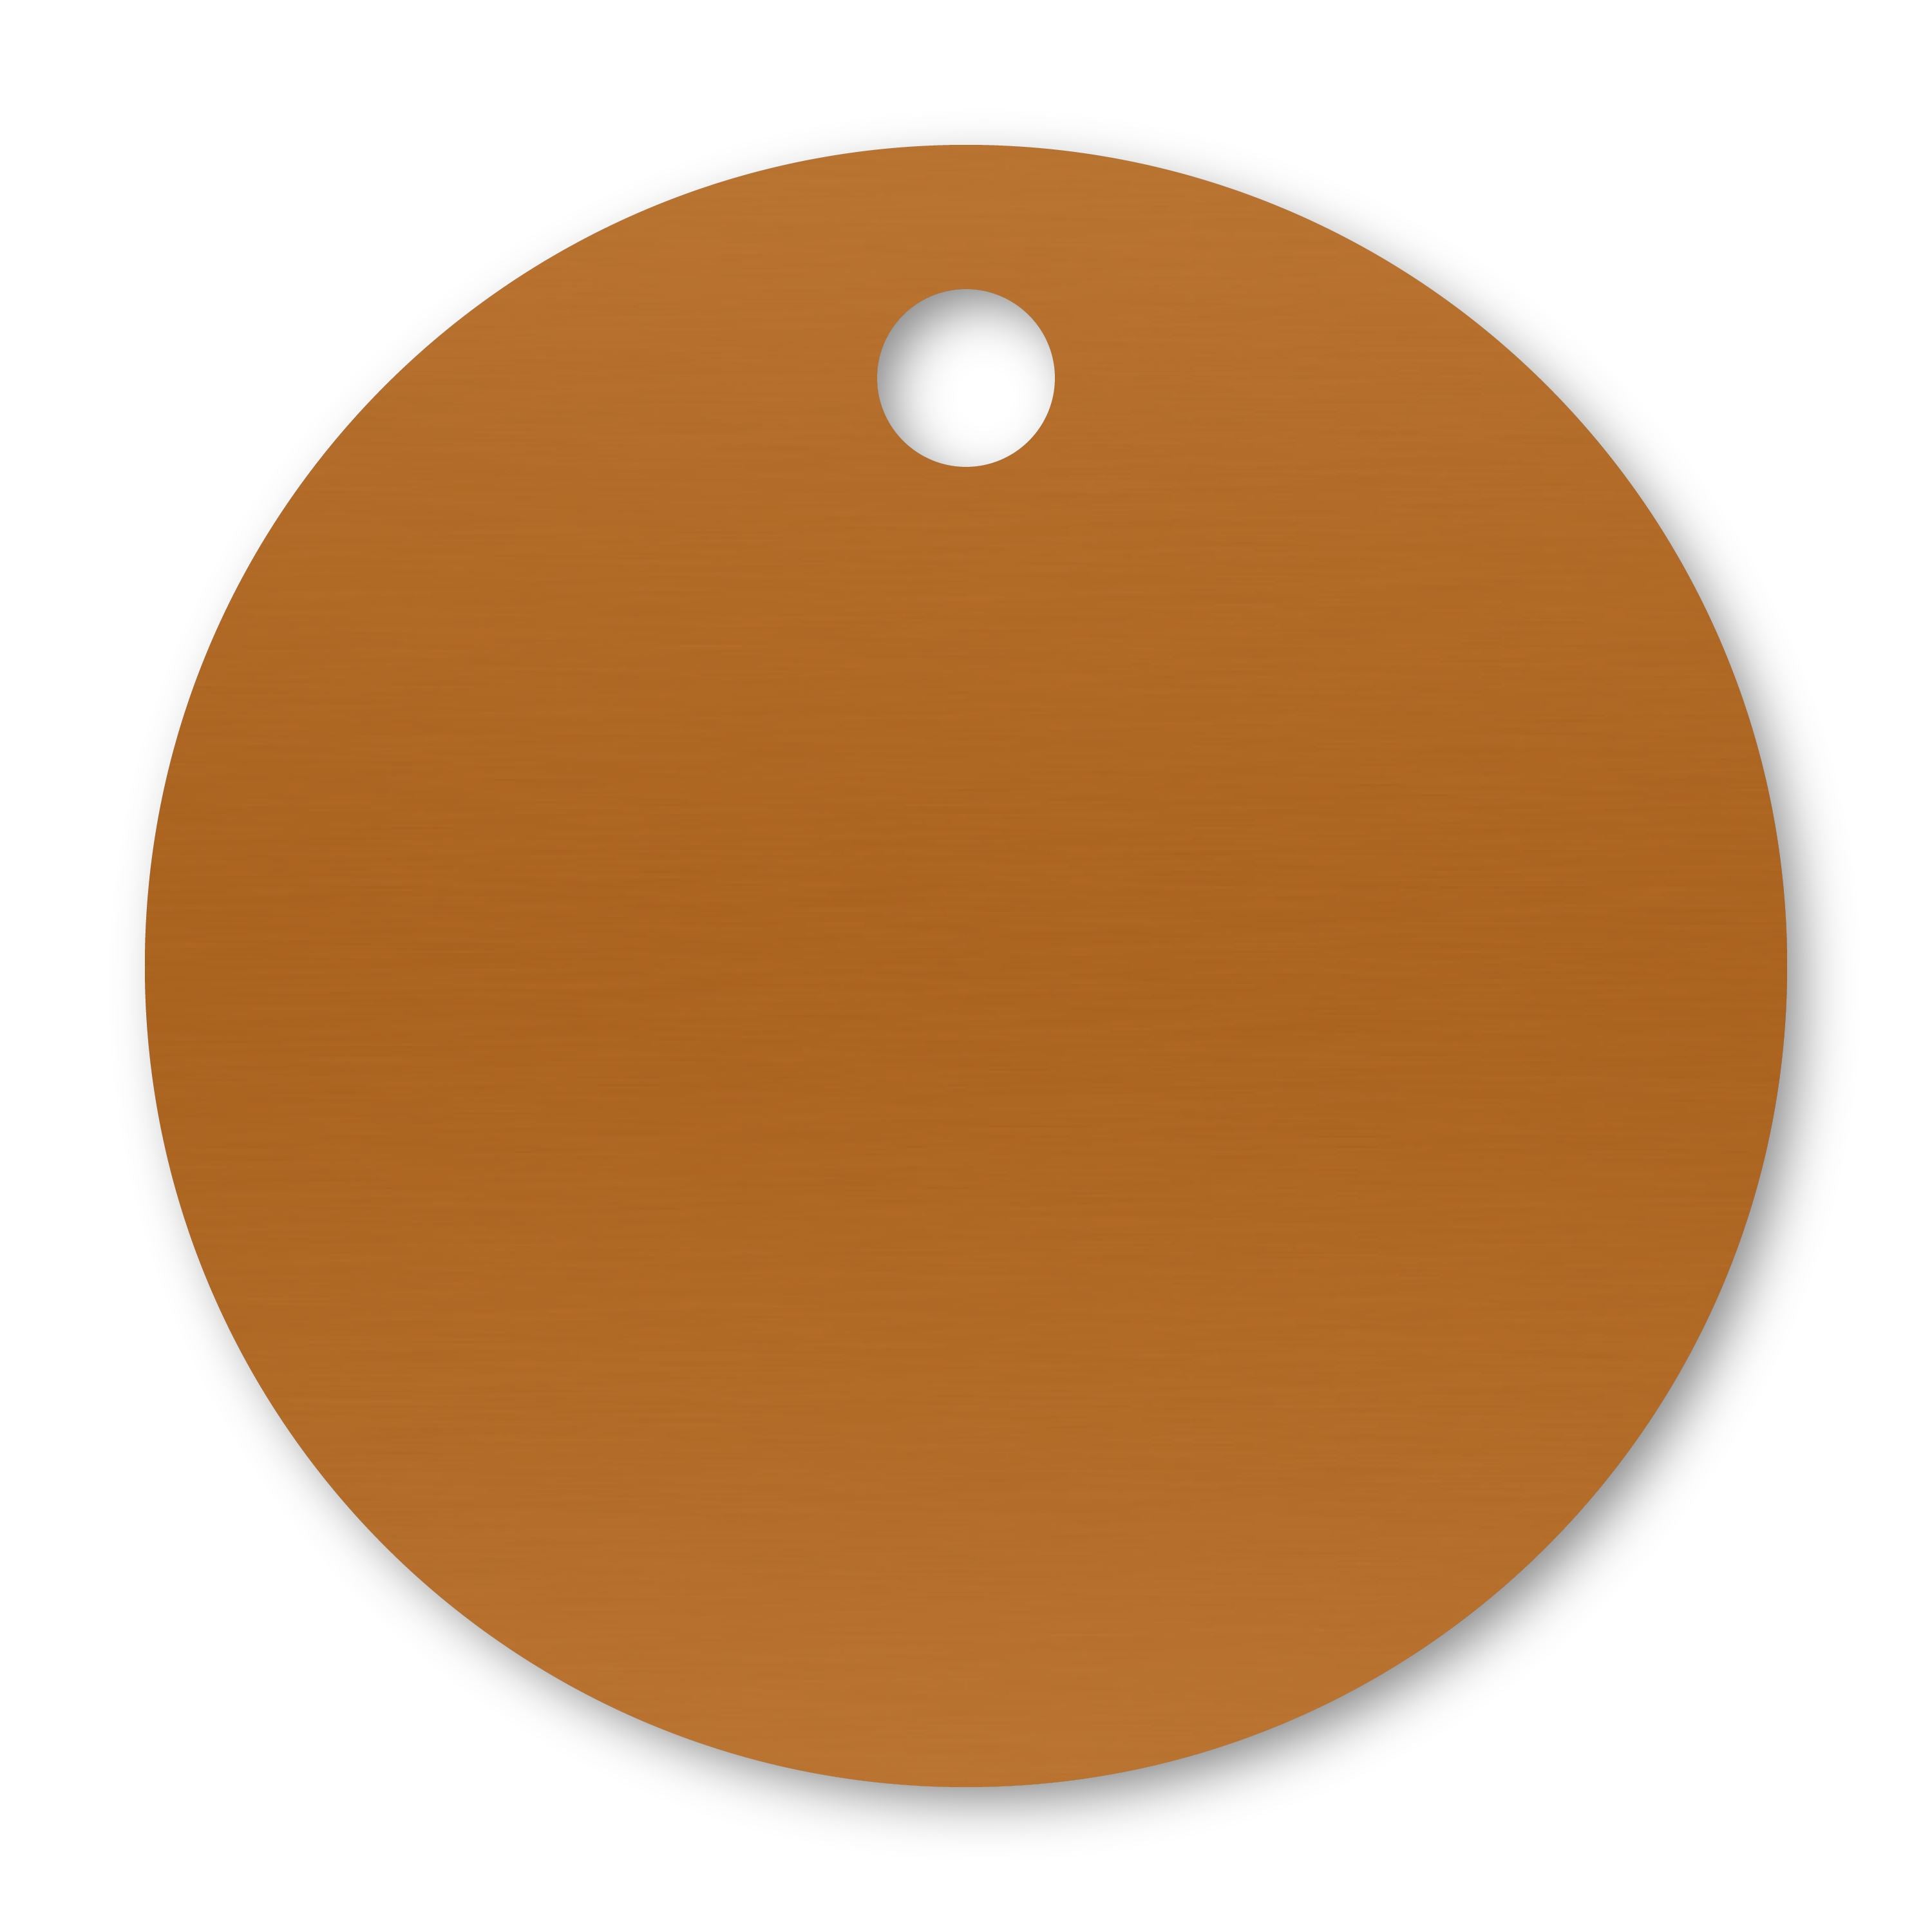 Anodized Aluminum Round Tags, 1-1/4 with 1/8 Hole, Laser Engraved